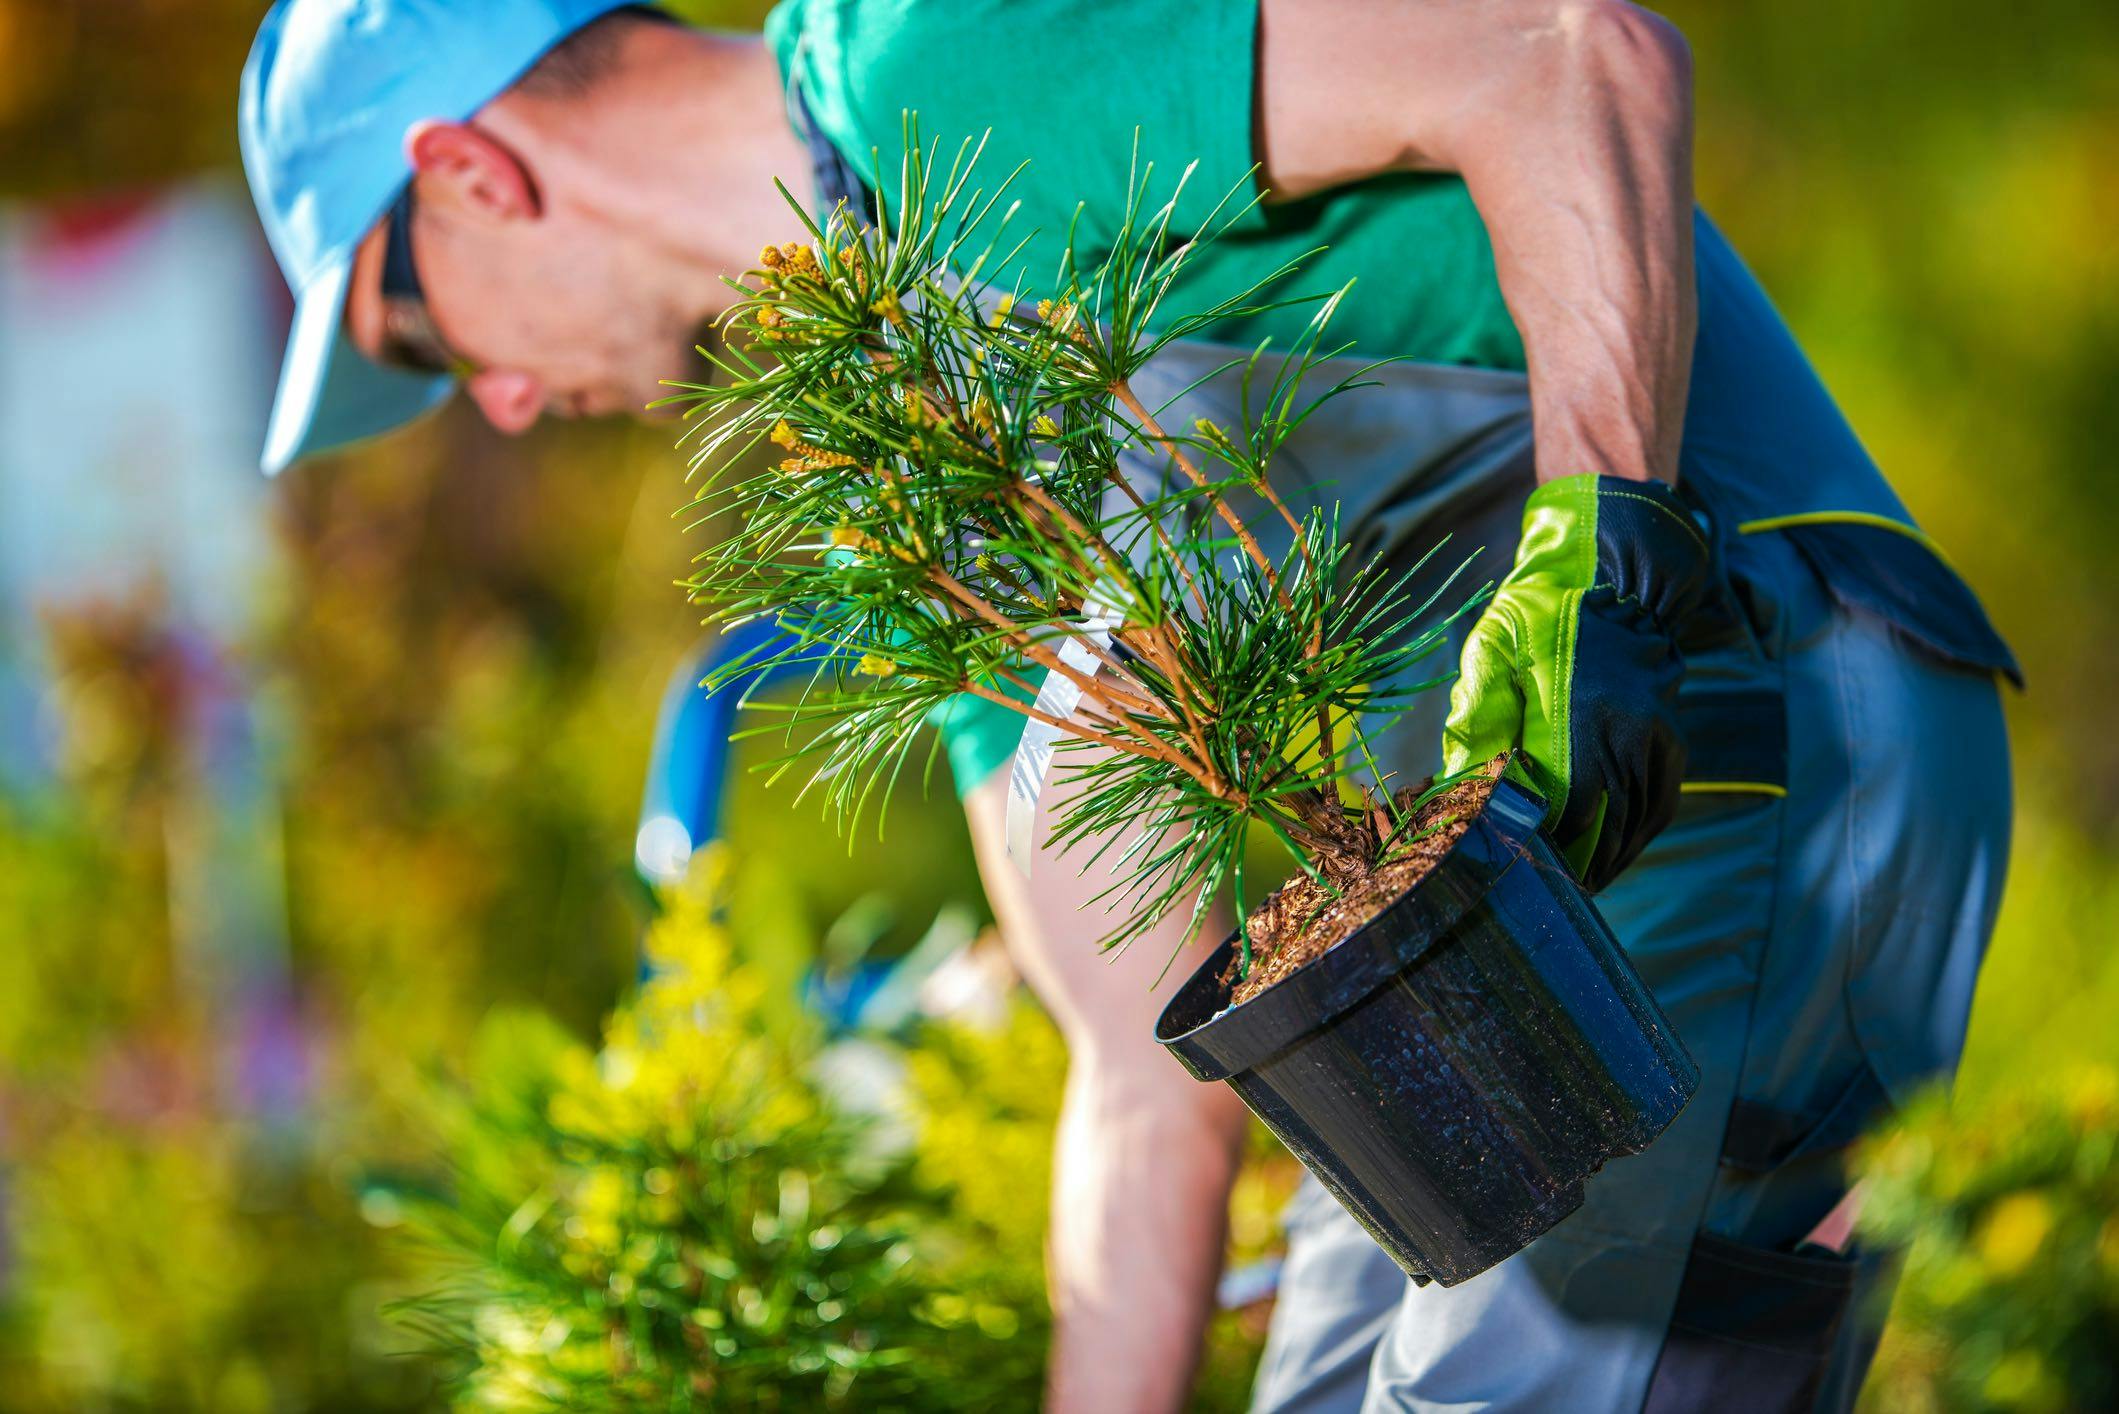 How To Start a Landscaping or Lawn Care Business